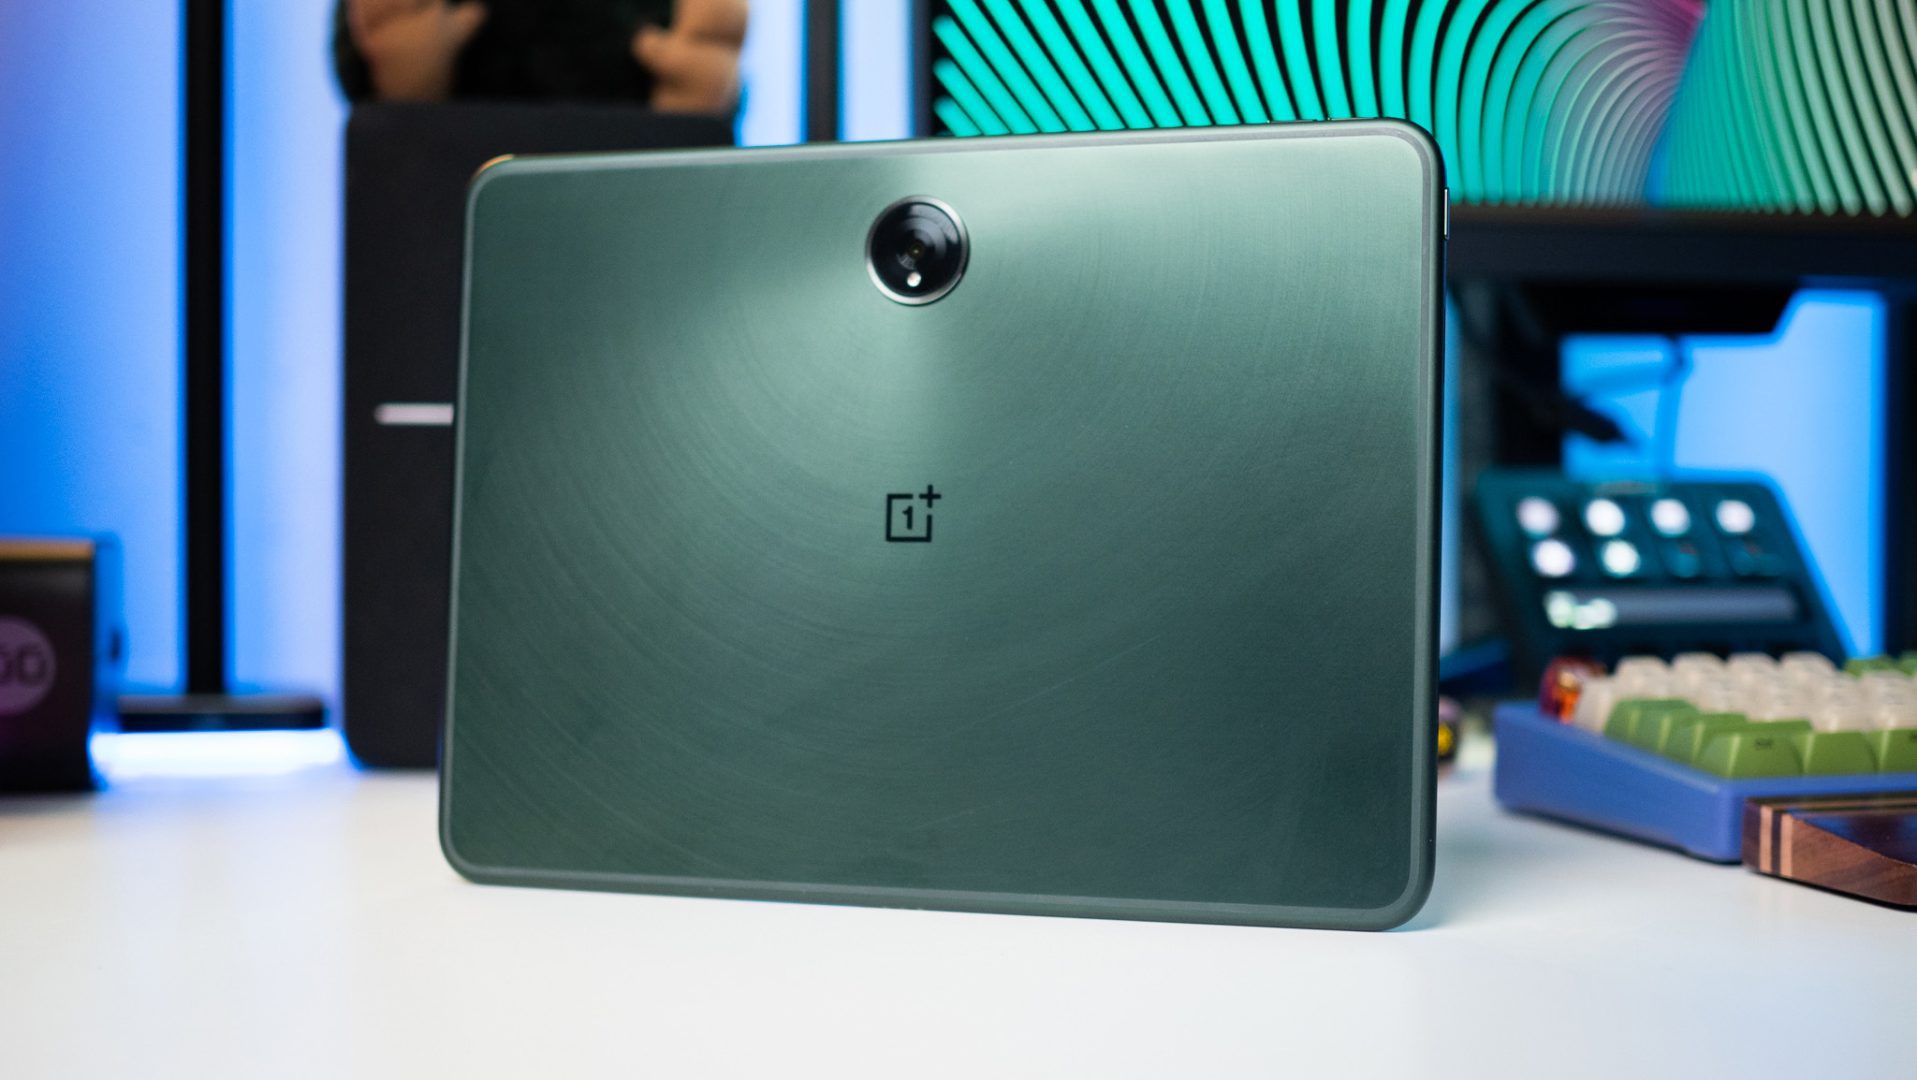 OnePlus’ next tablet could be released in the second half of this year